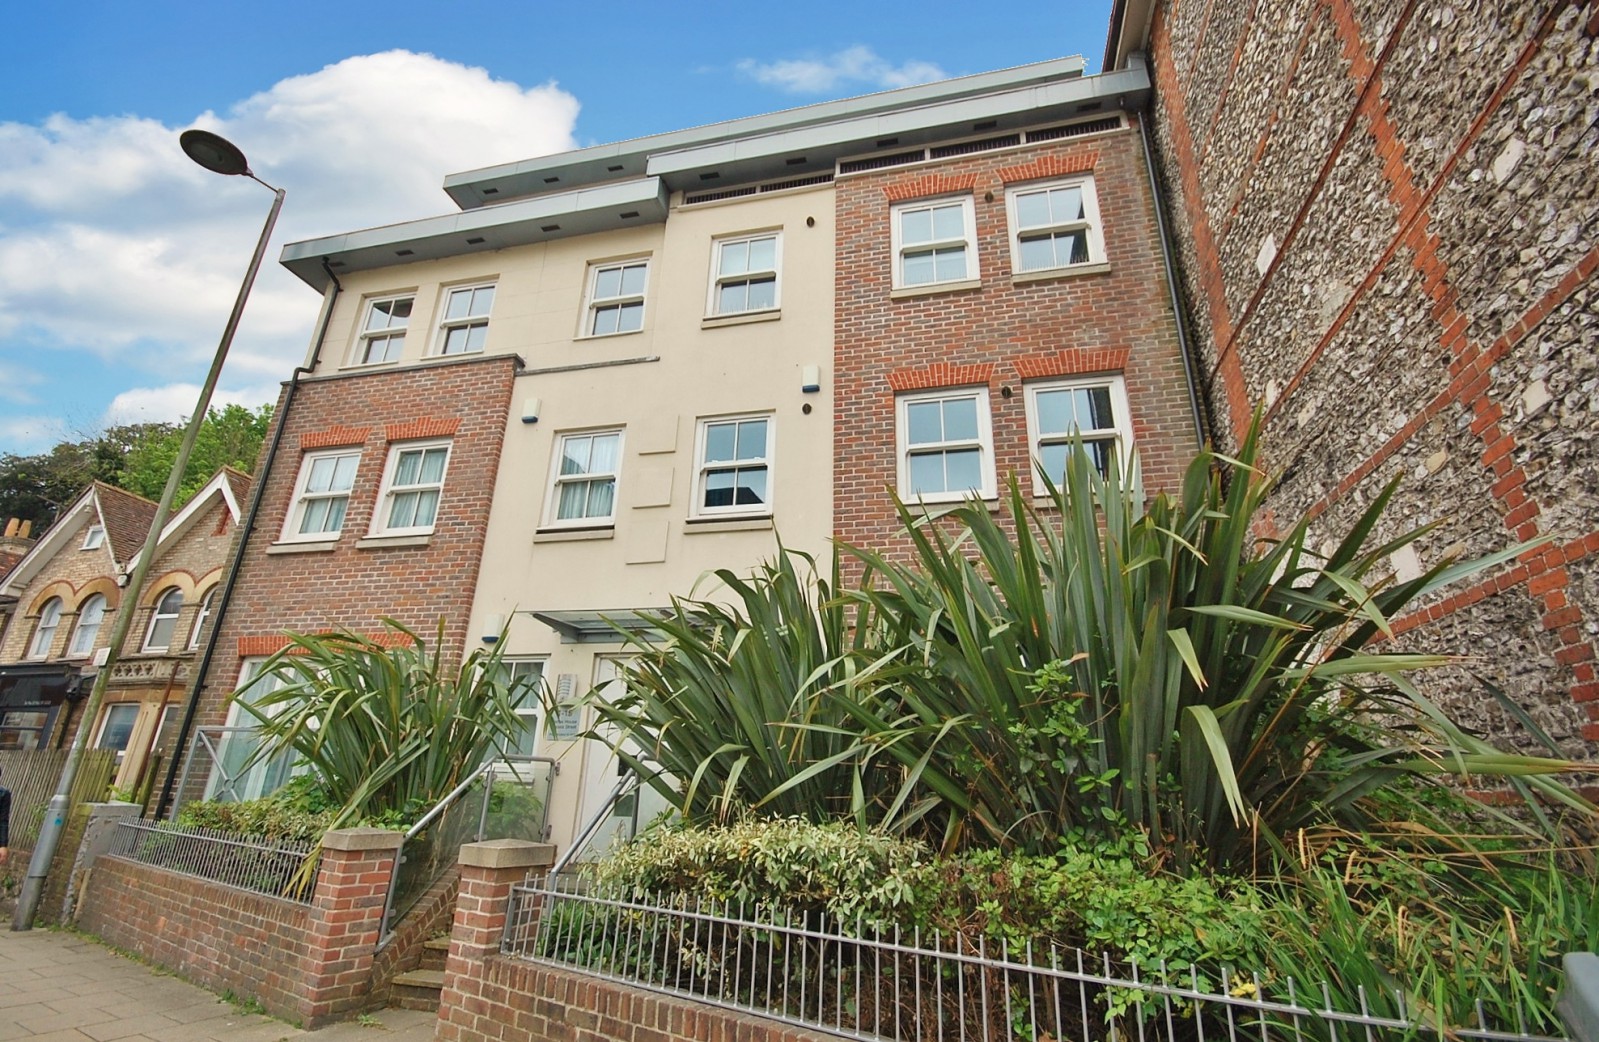 Flat 14 Carfax House, 23 City Road, Winchester SO23 8SD